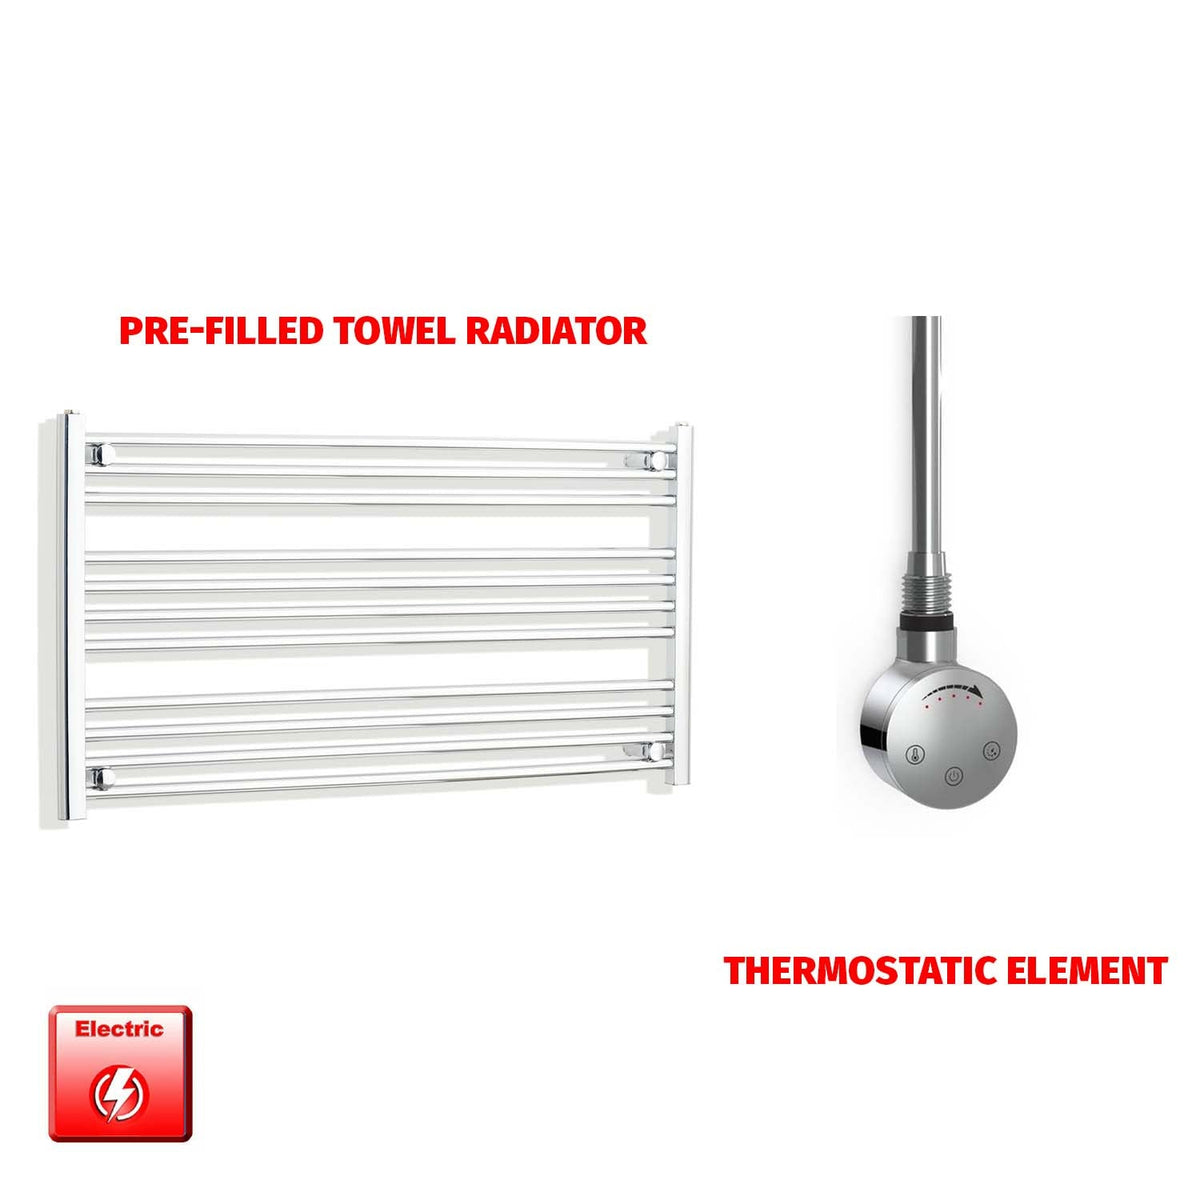 600mm High 950mm Wide Pre-Filled Electric Heated Towel Radiator Straight Chrome SMR Thermostatic element no timer